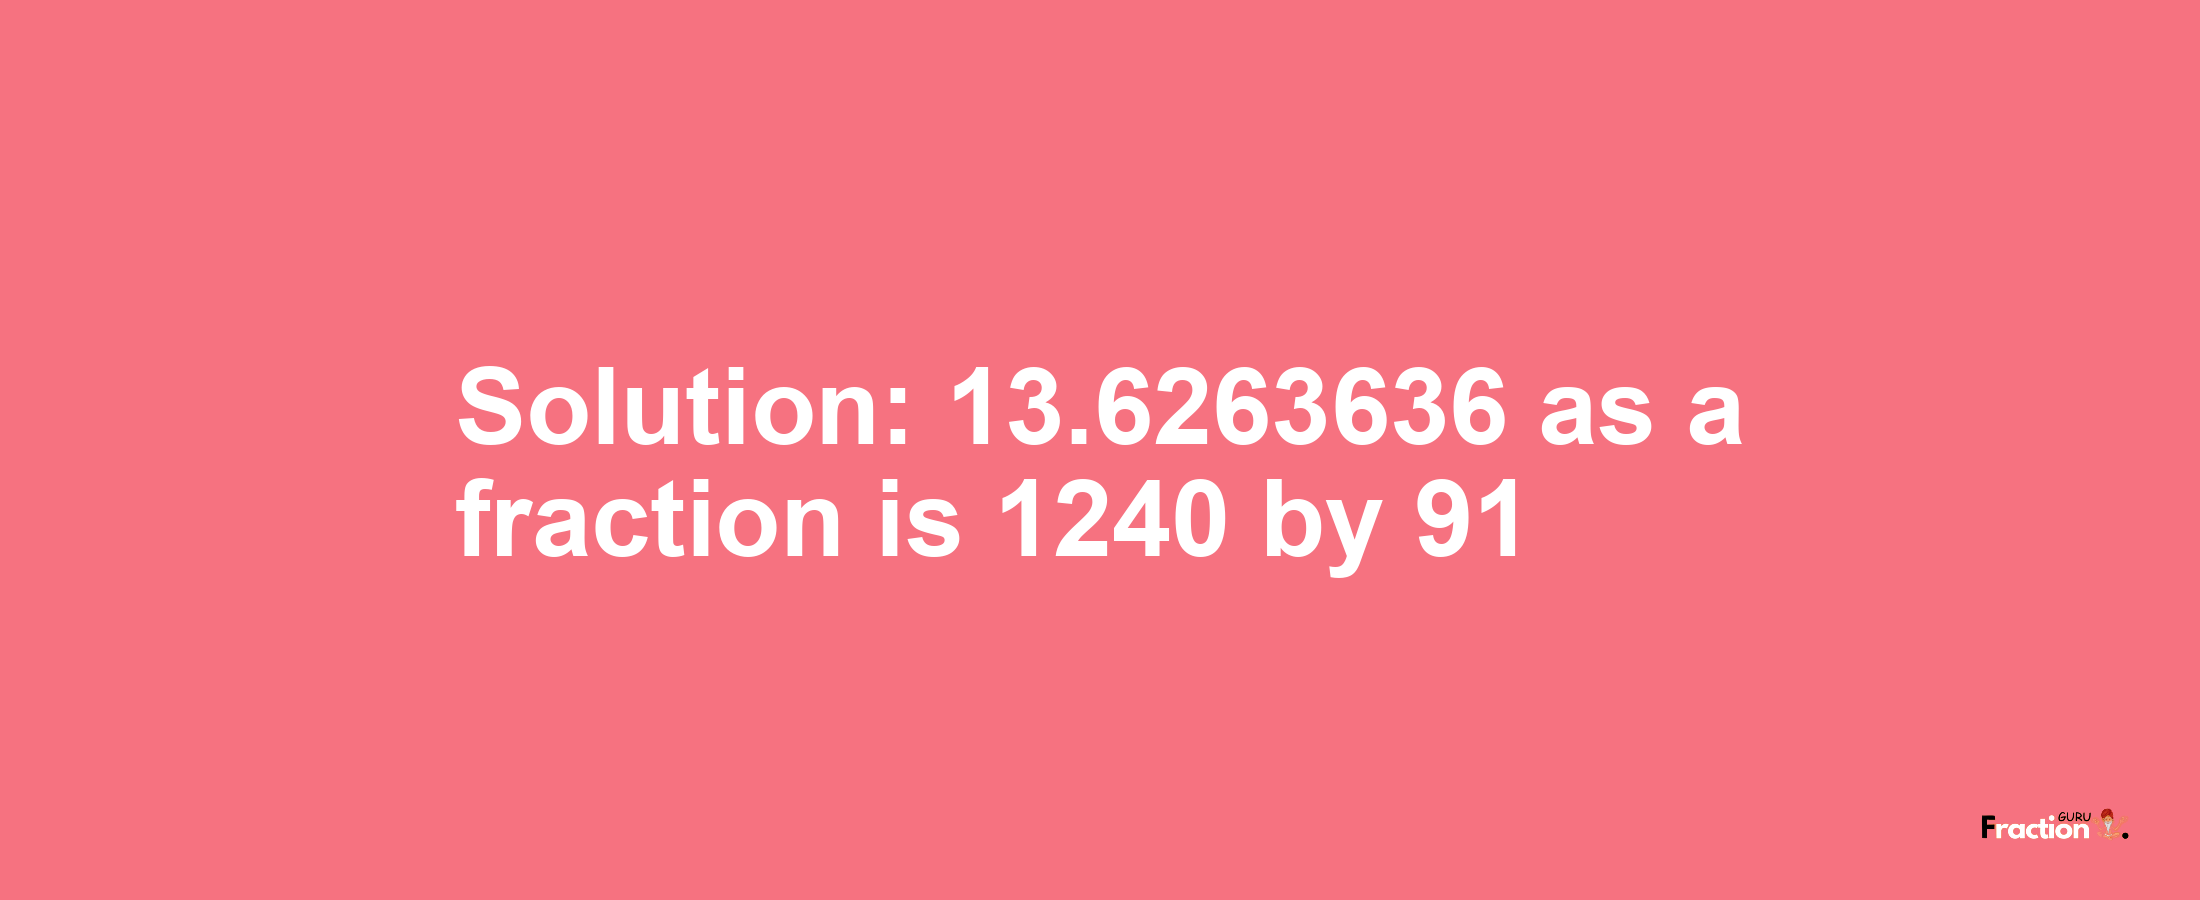 Solution:13.6263636 as a fraction is 1240/91